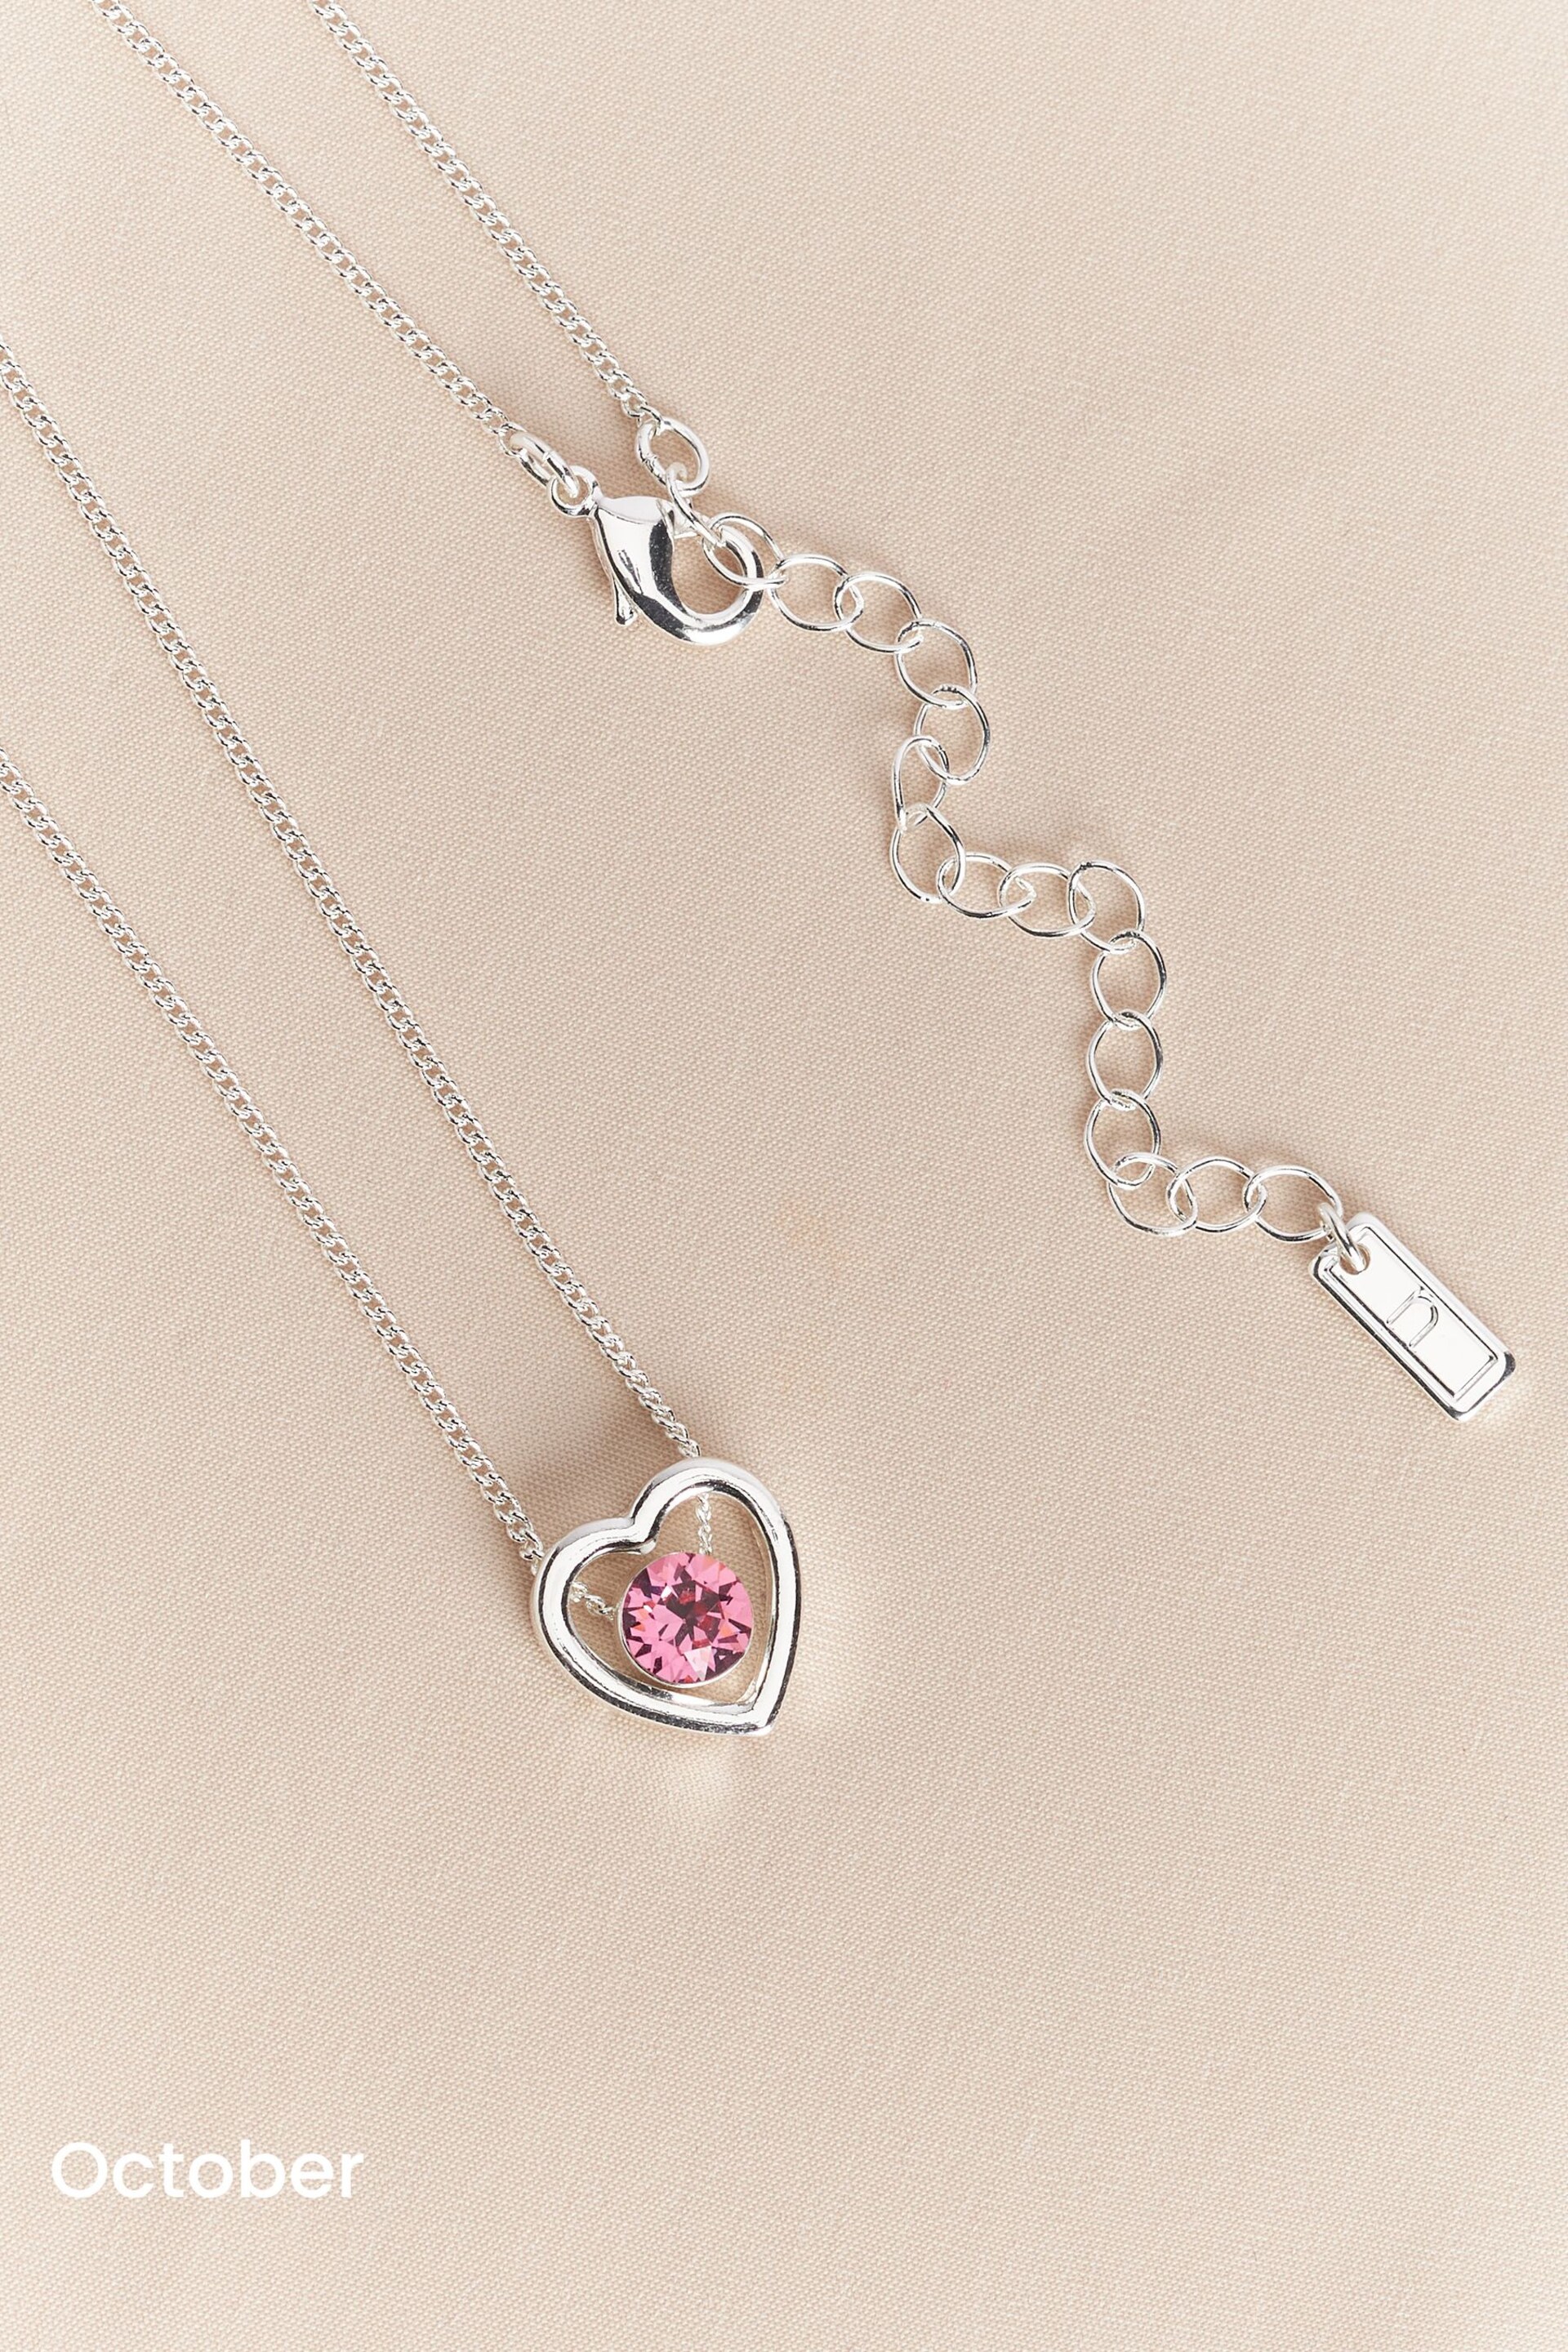 Silver Plated Heart Birthstone Necklace - Image 11 of 13